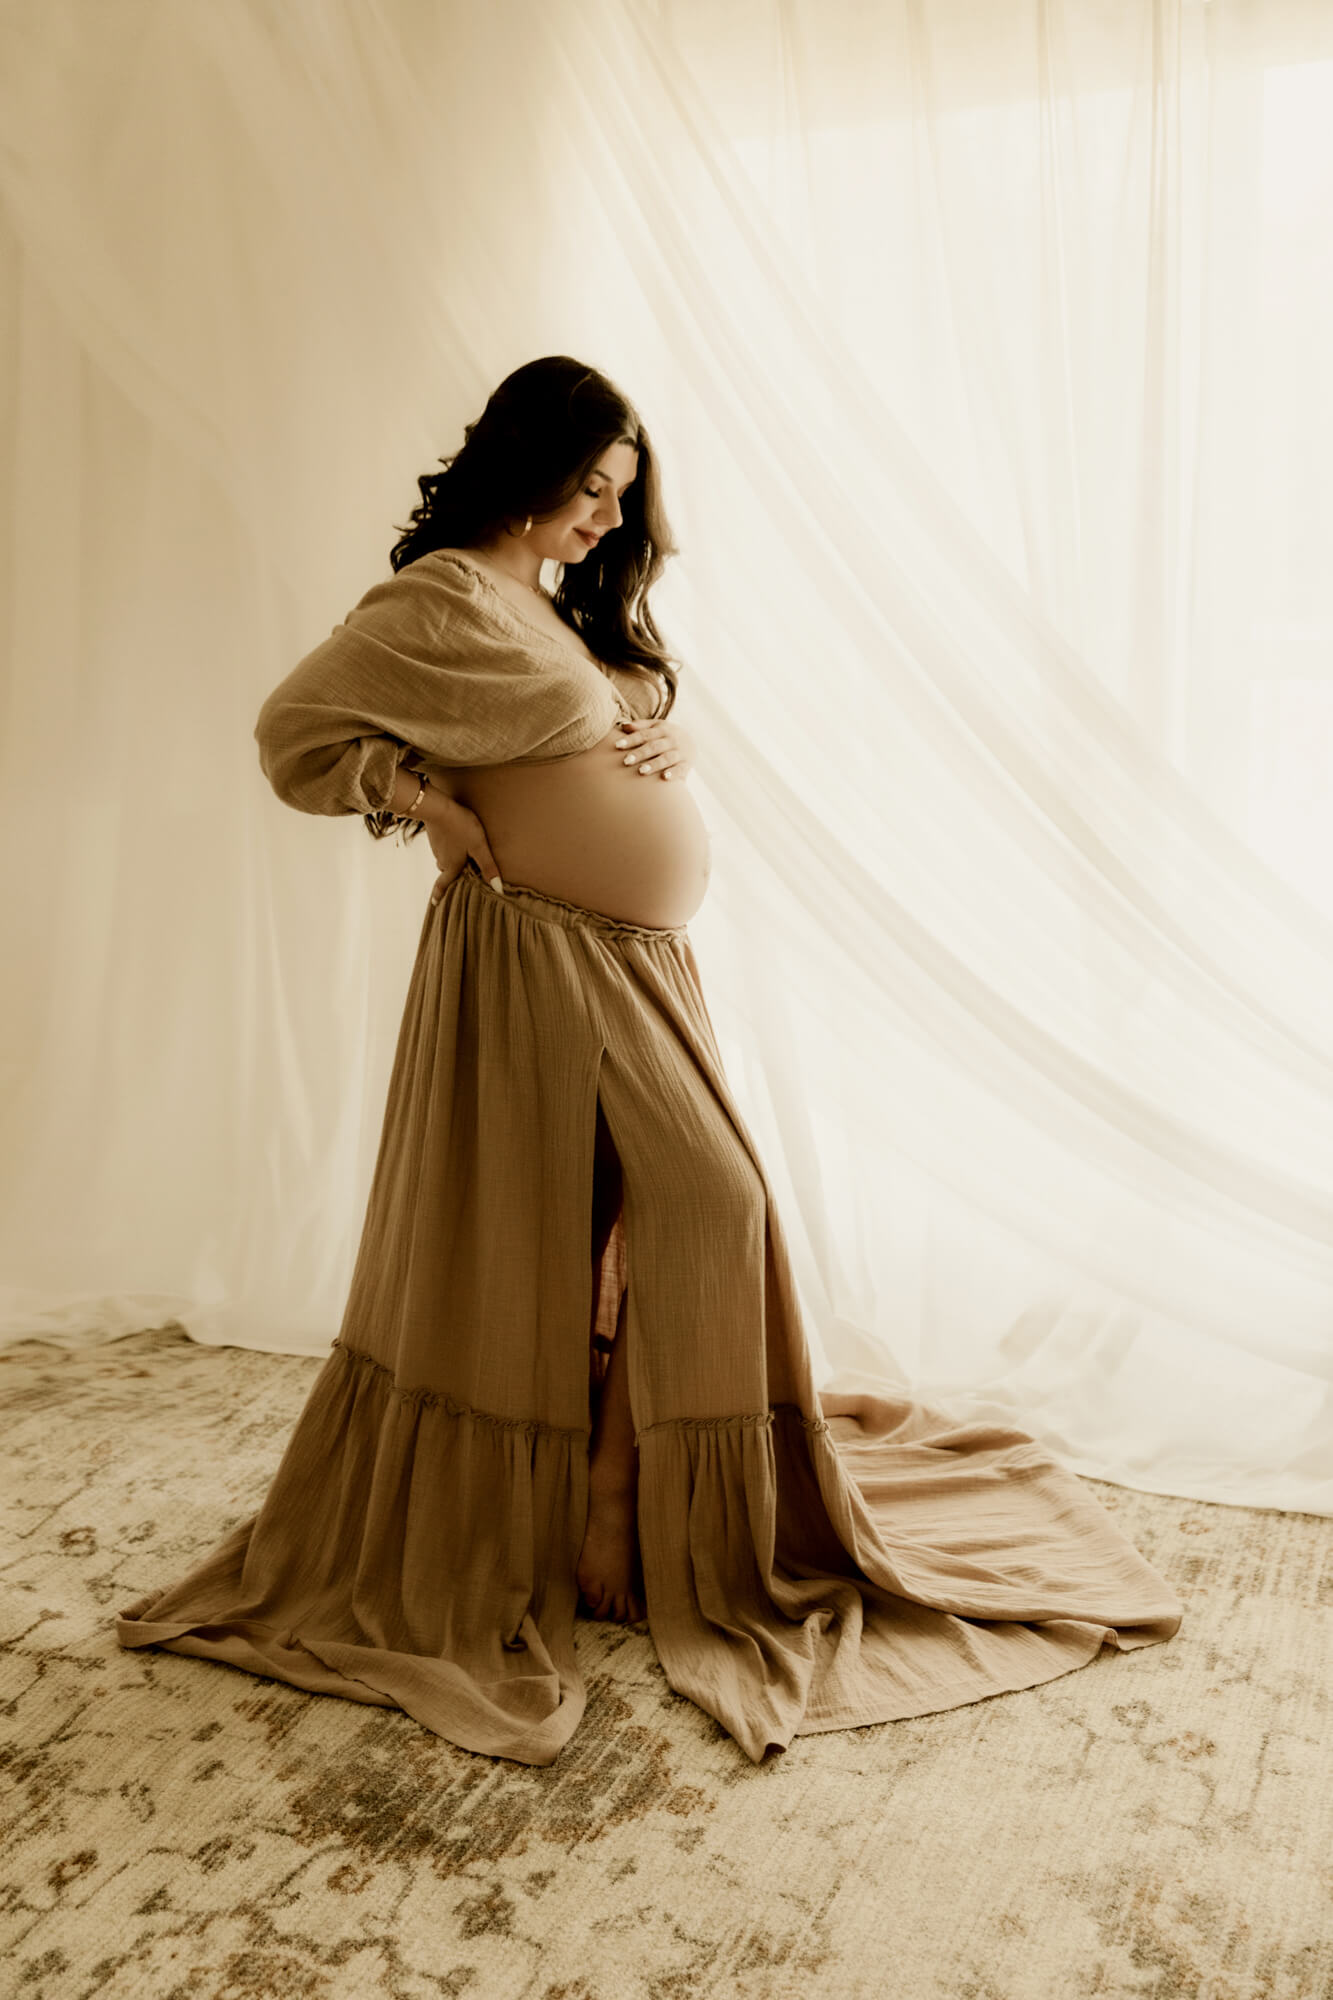 A mother to be stands in a studio by a window while looking down at her bump